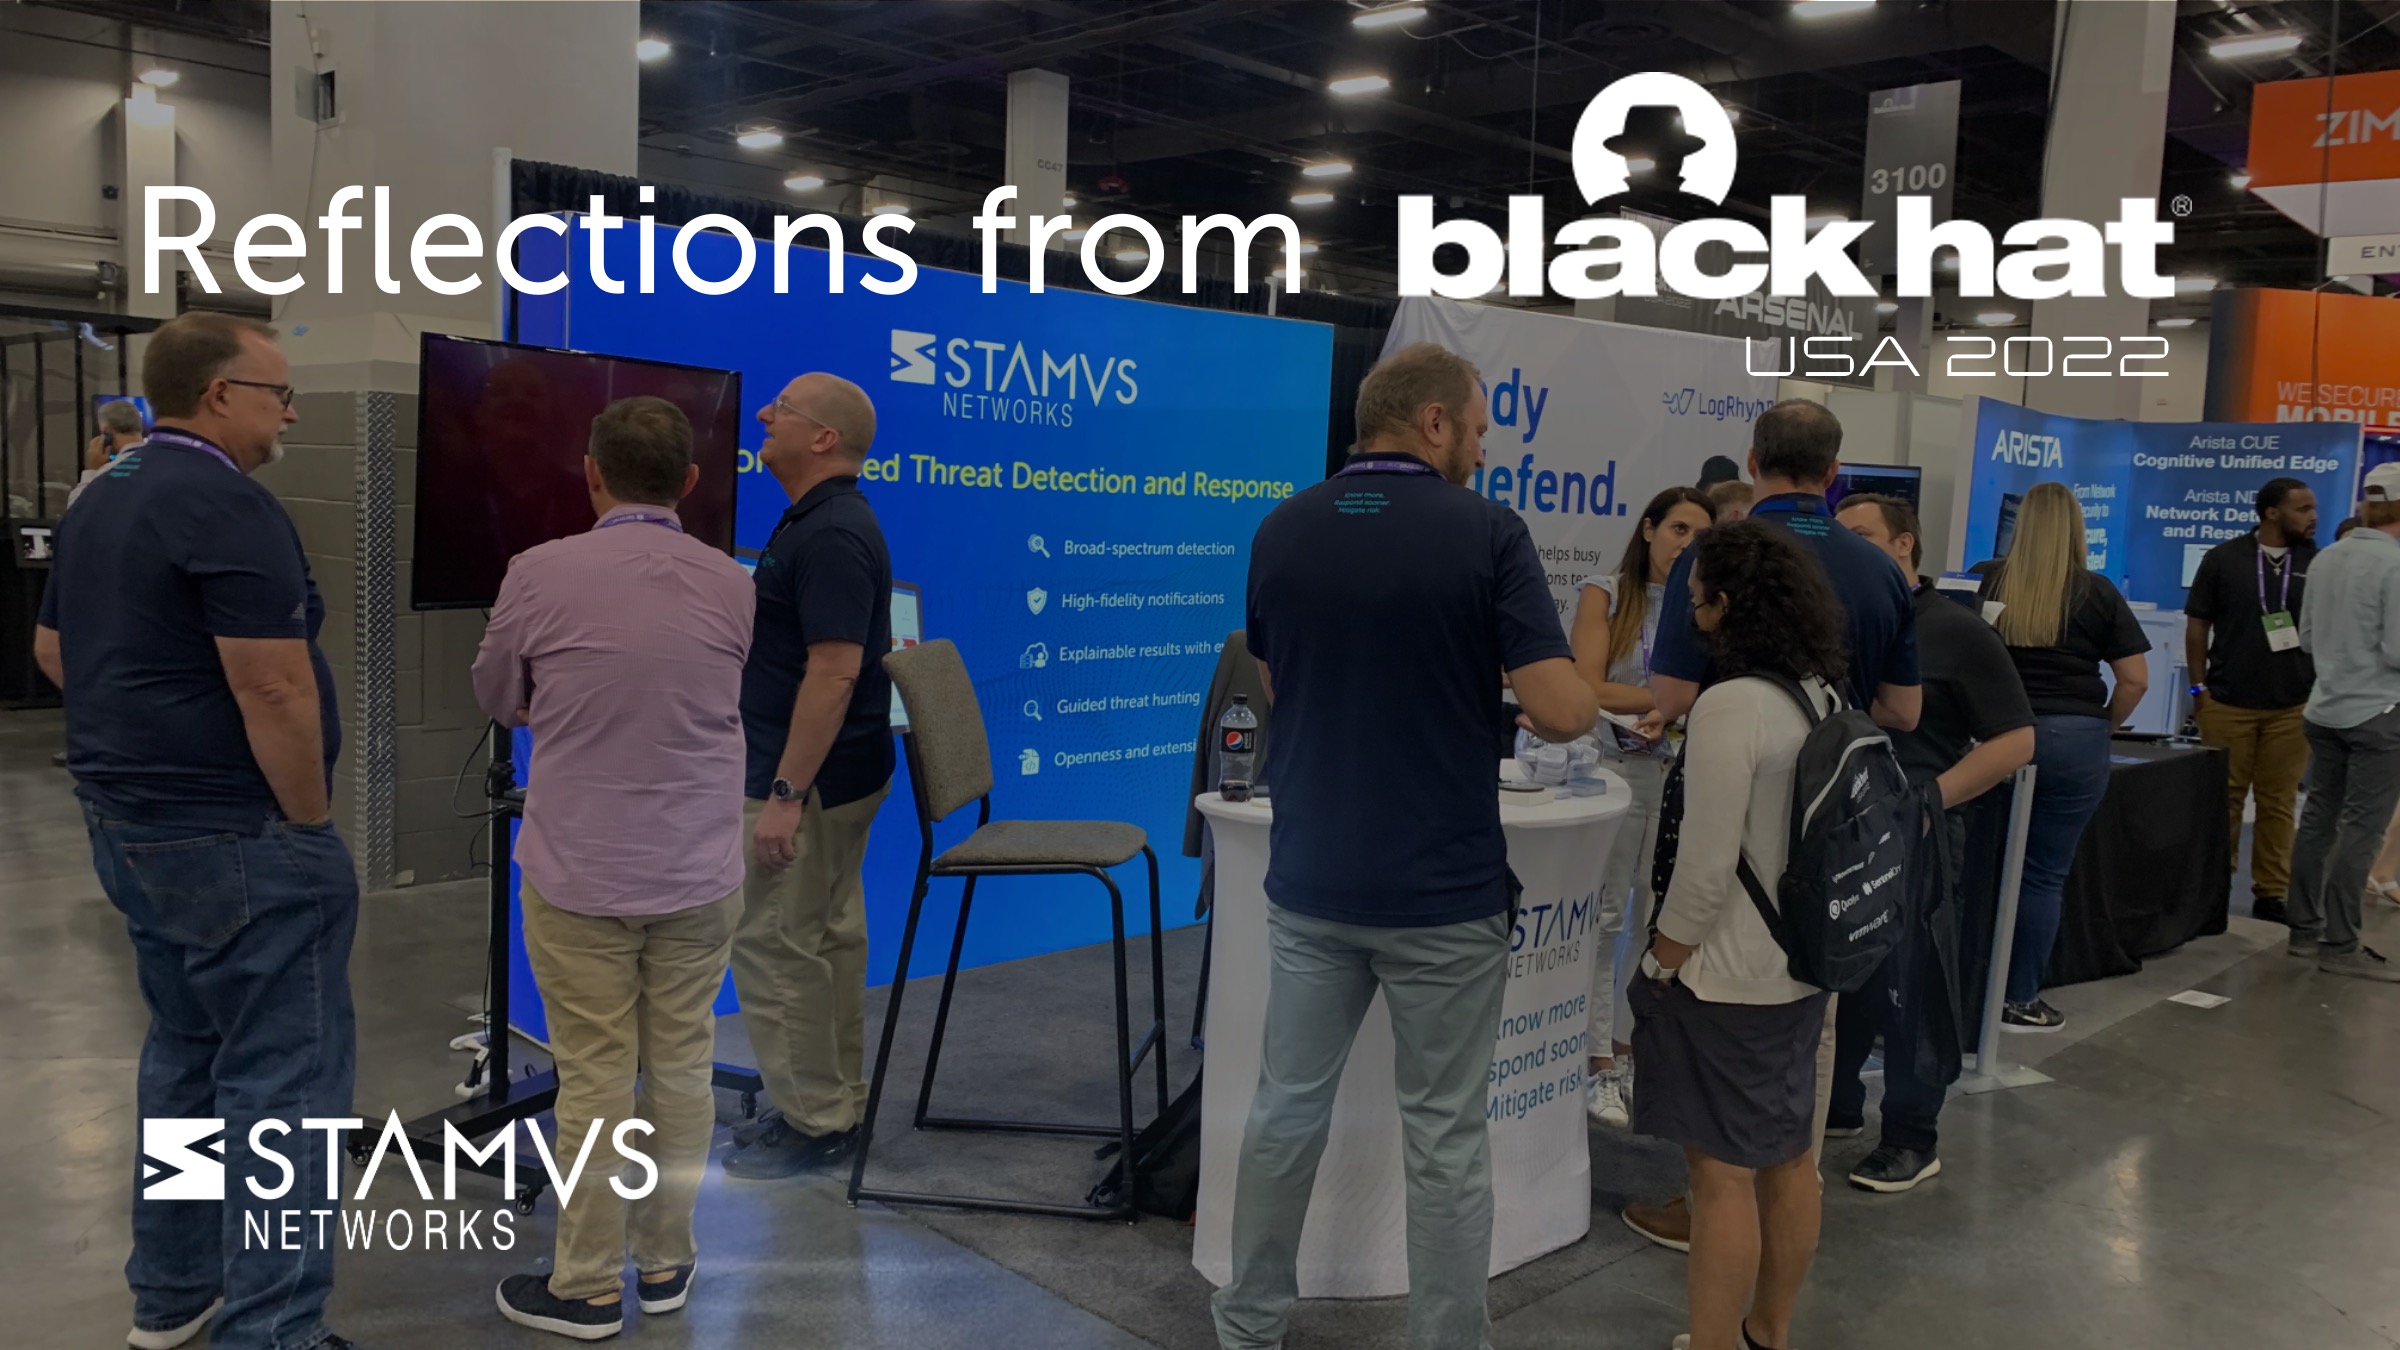 IMAGE: Stamus Networks Reflections on Black Hat USA 2022